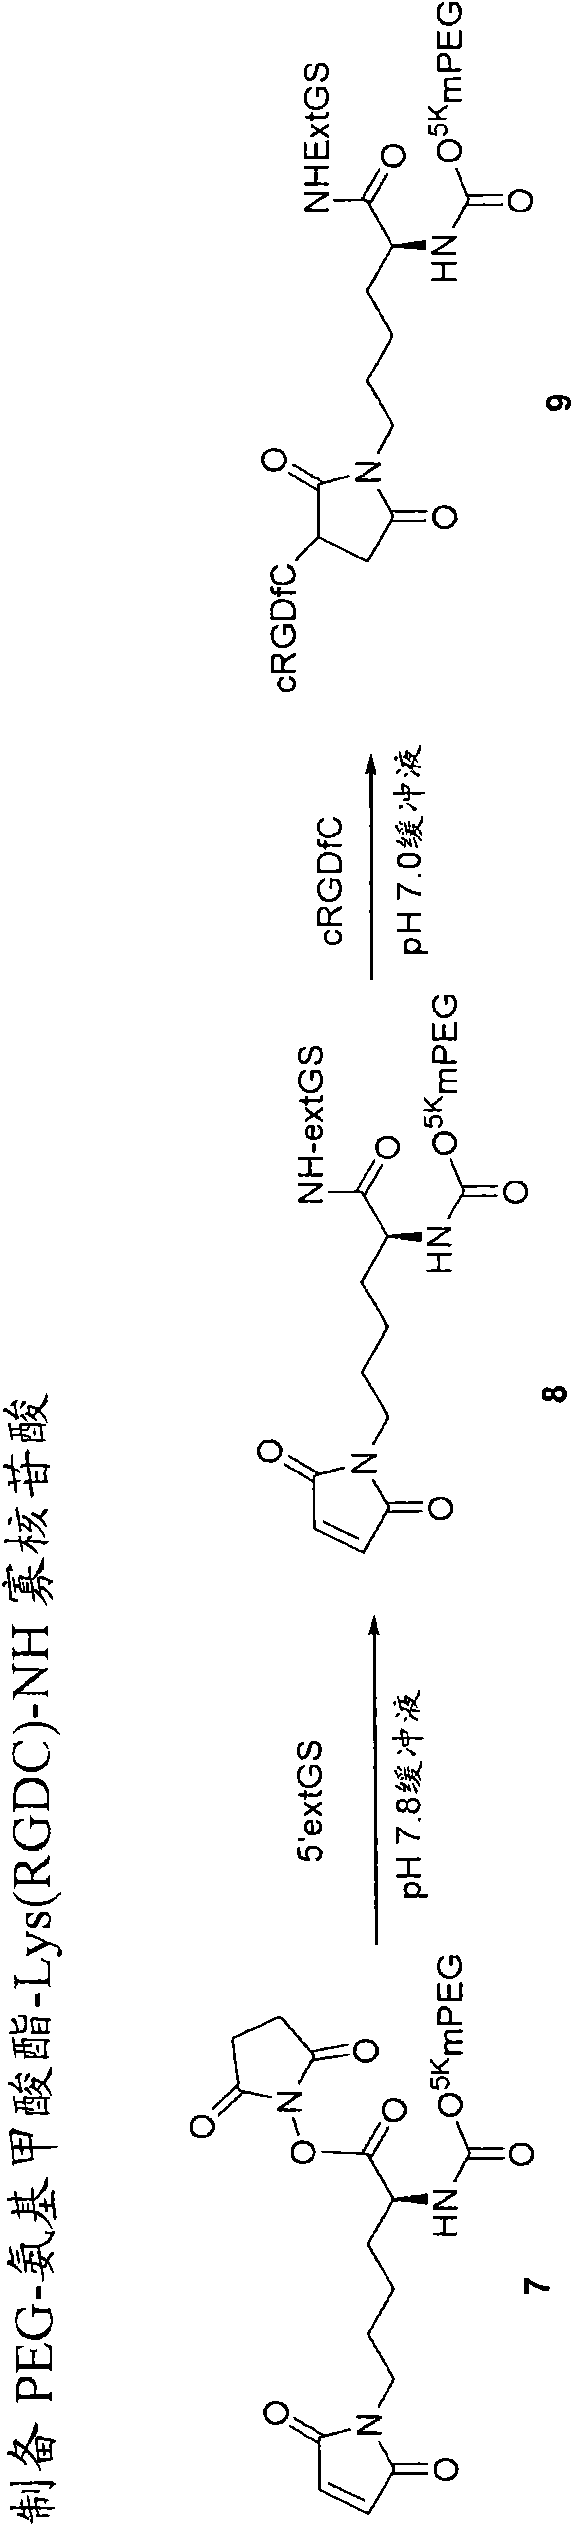 Targeted polymeric prodrugs containing multifunctional linkers